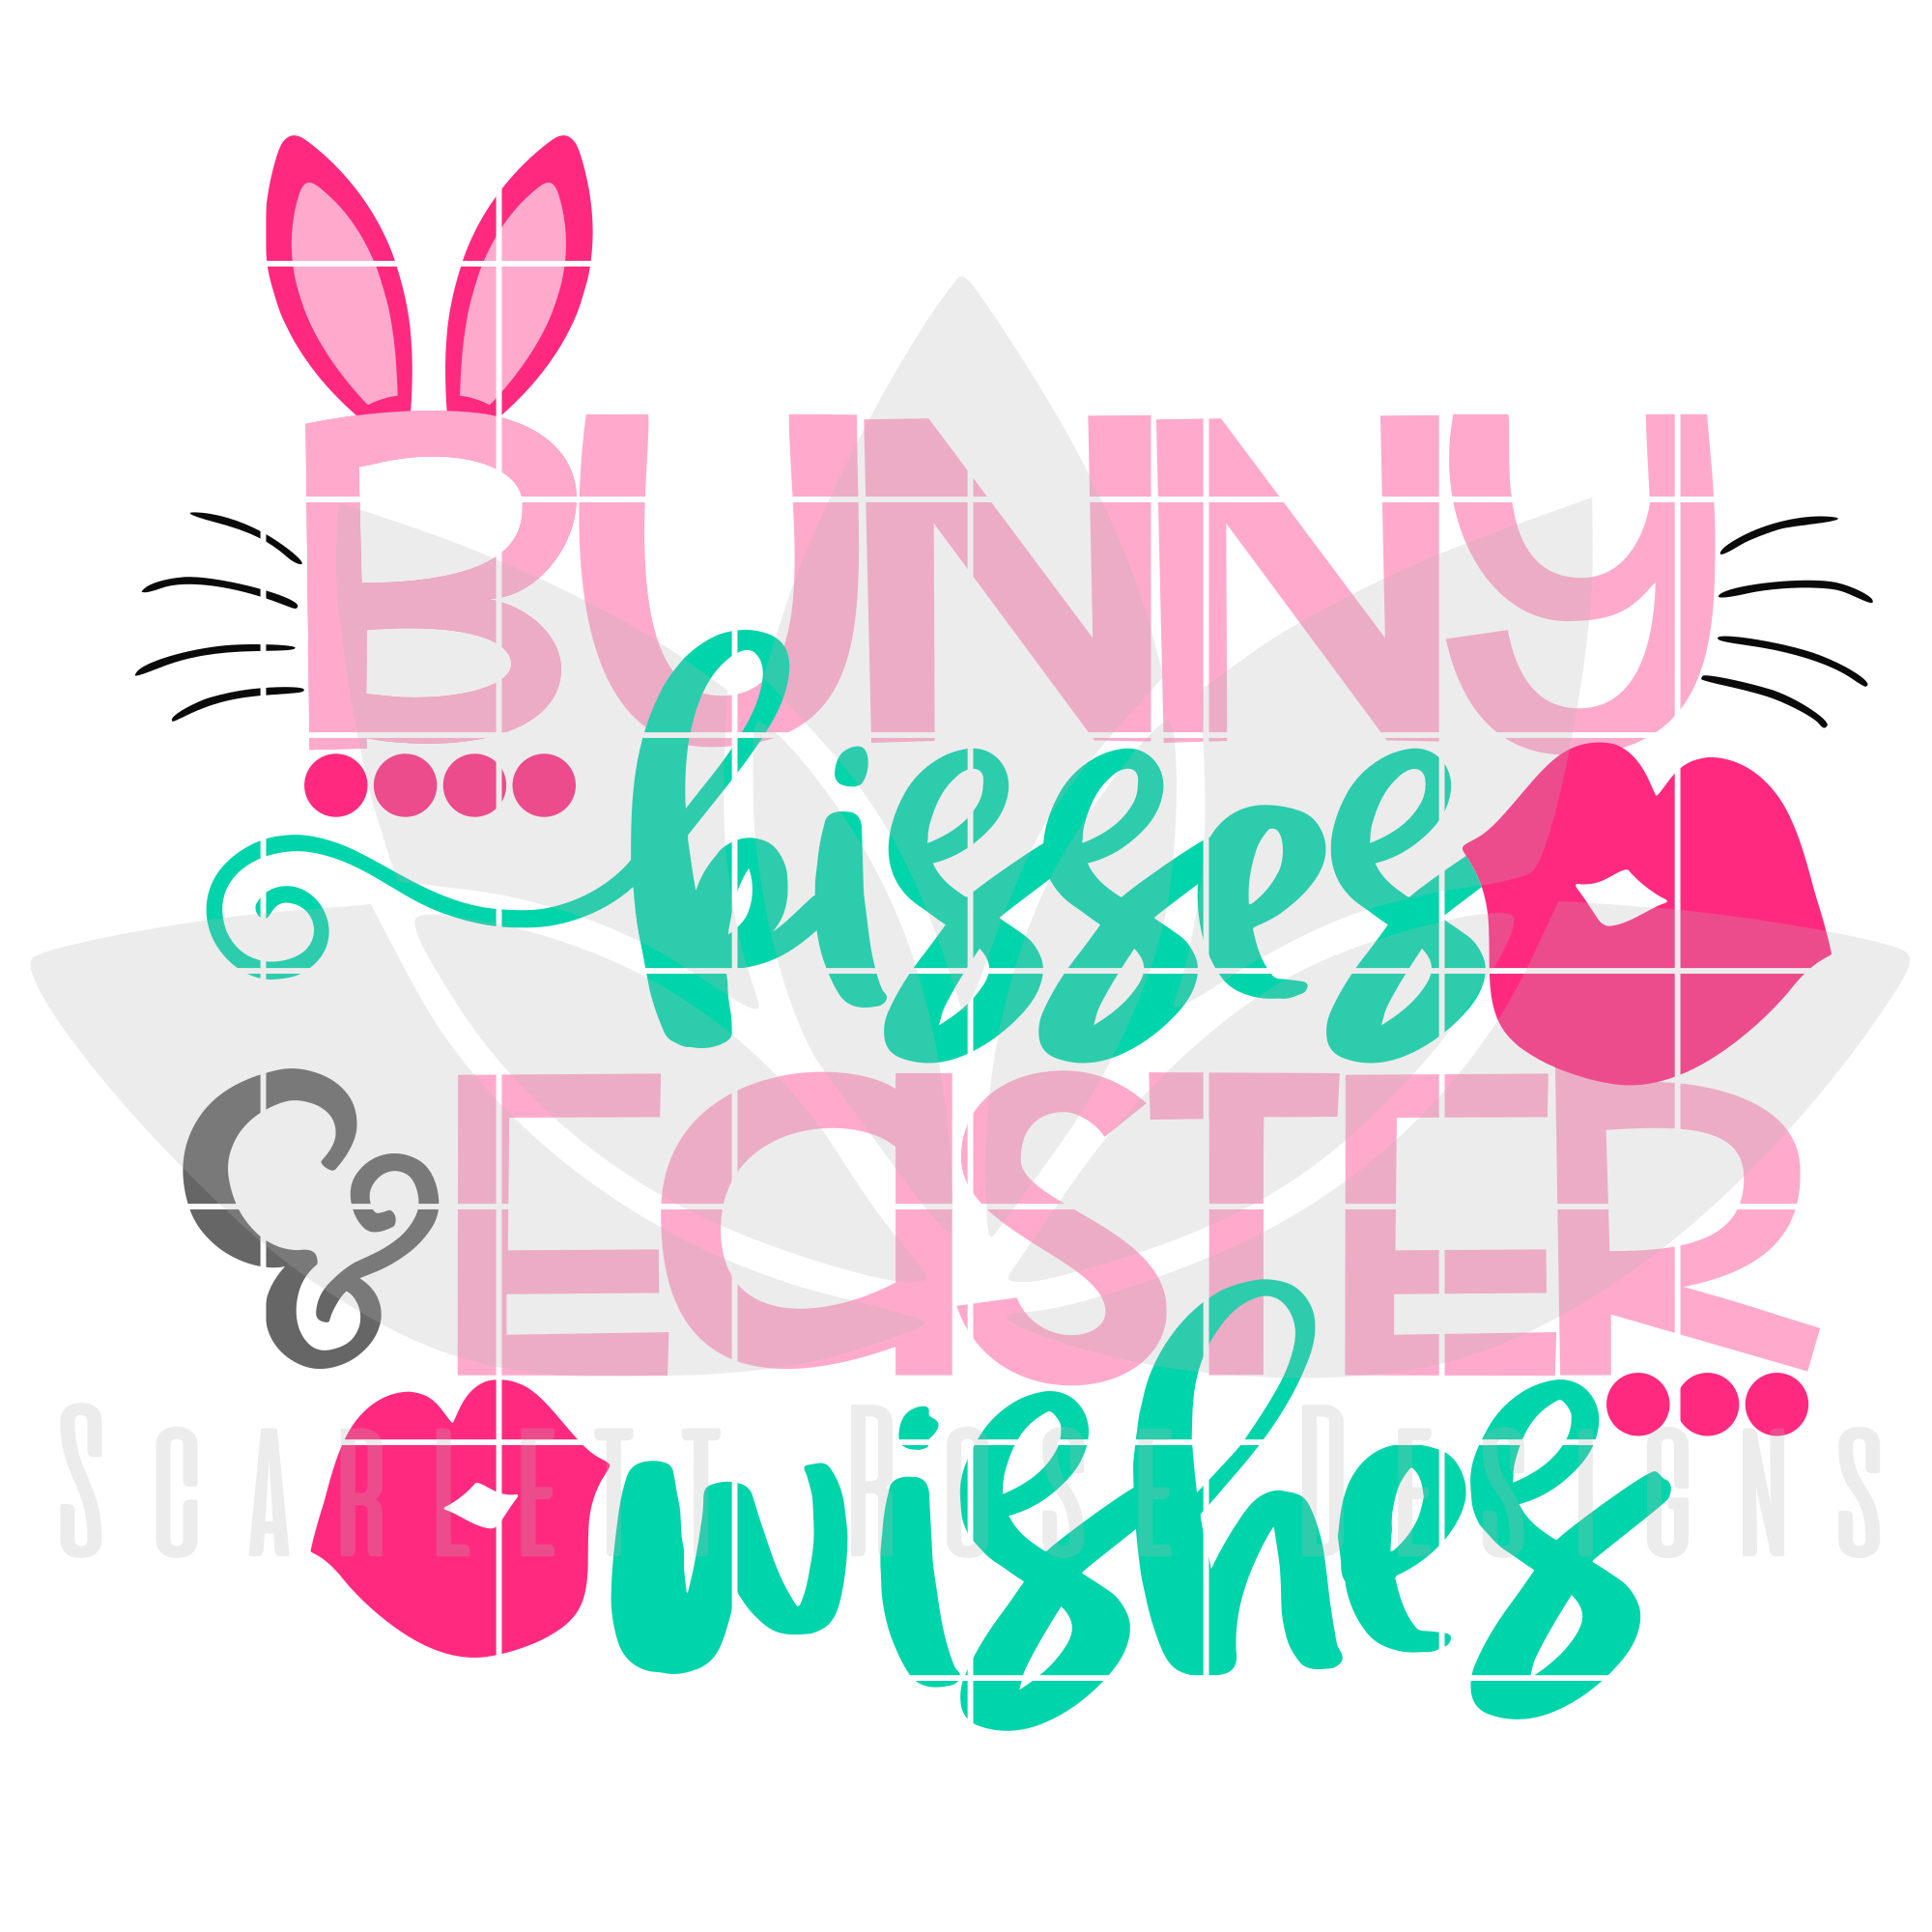 Bunny Kisses and Easter Wishes - SoFontsy